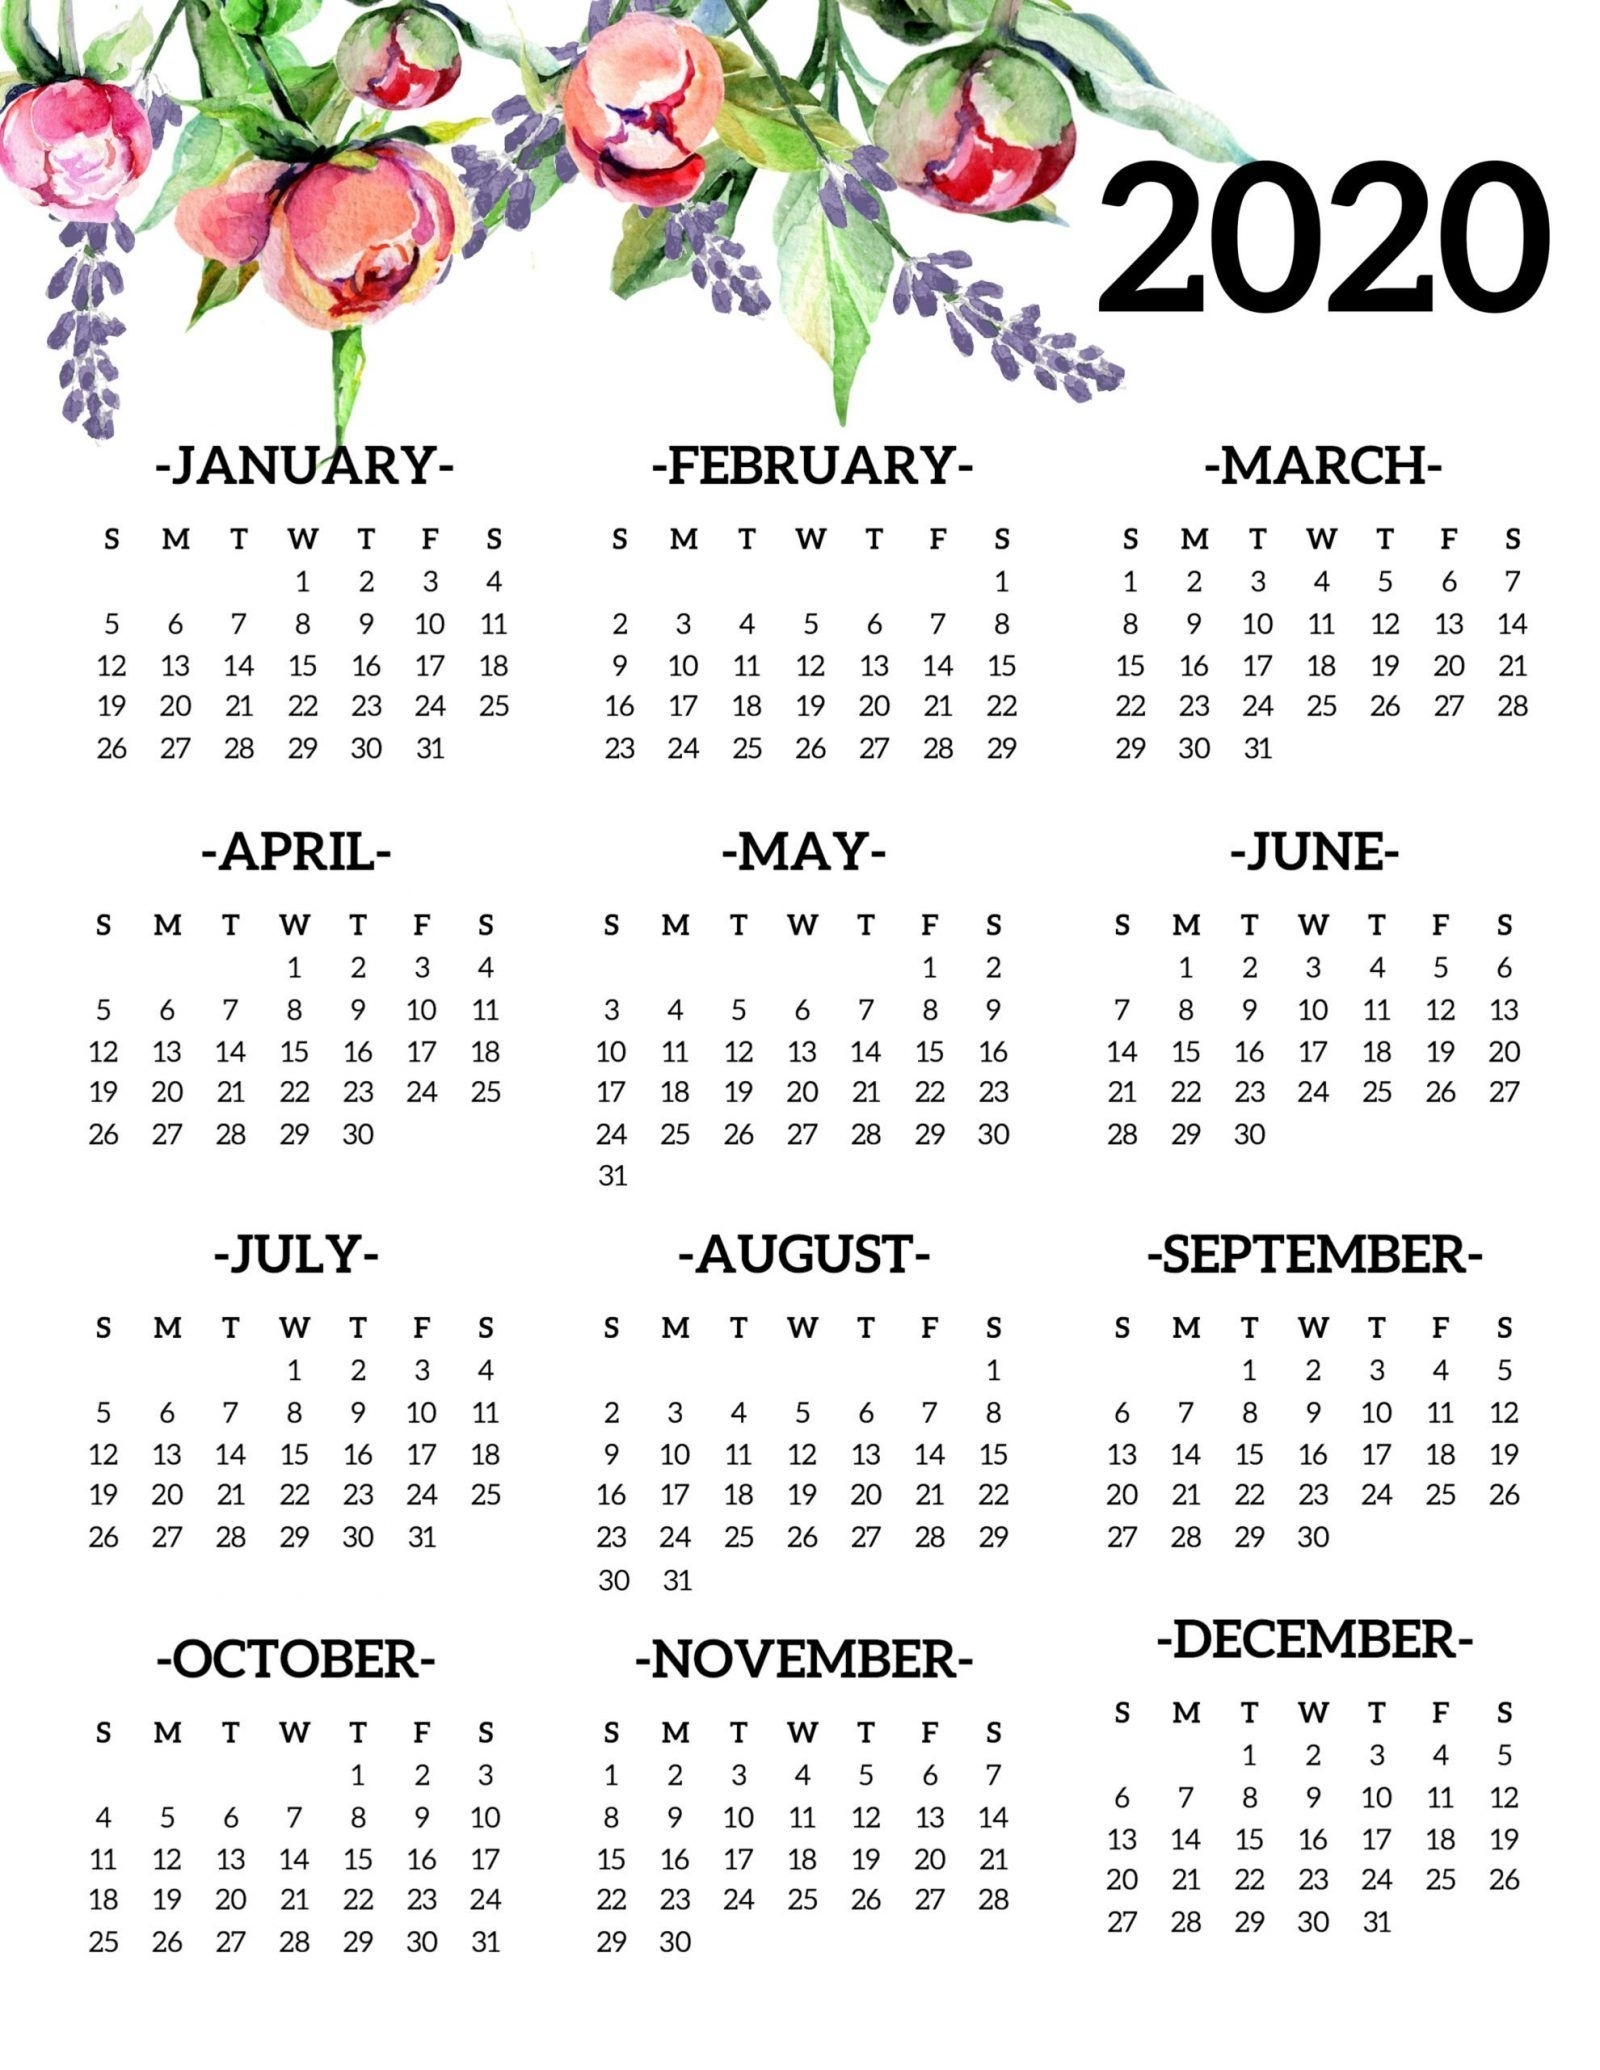 20 Free Printable Calendars For 2020 - Yesmissy In 2020 pertaining to Free 2020 Calendar At A Glance